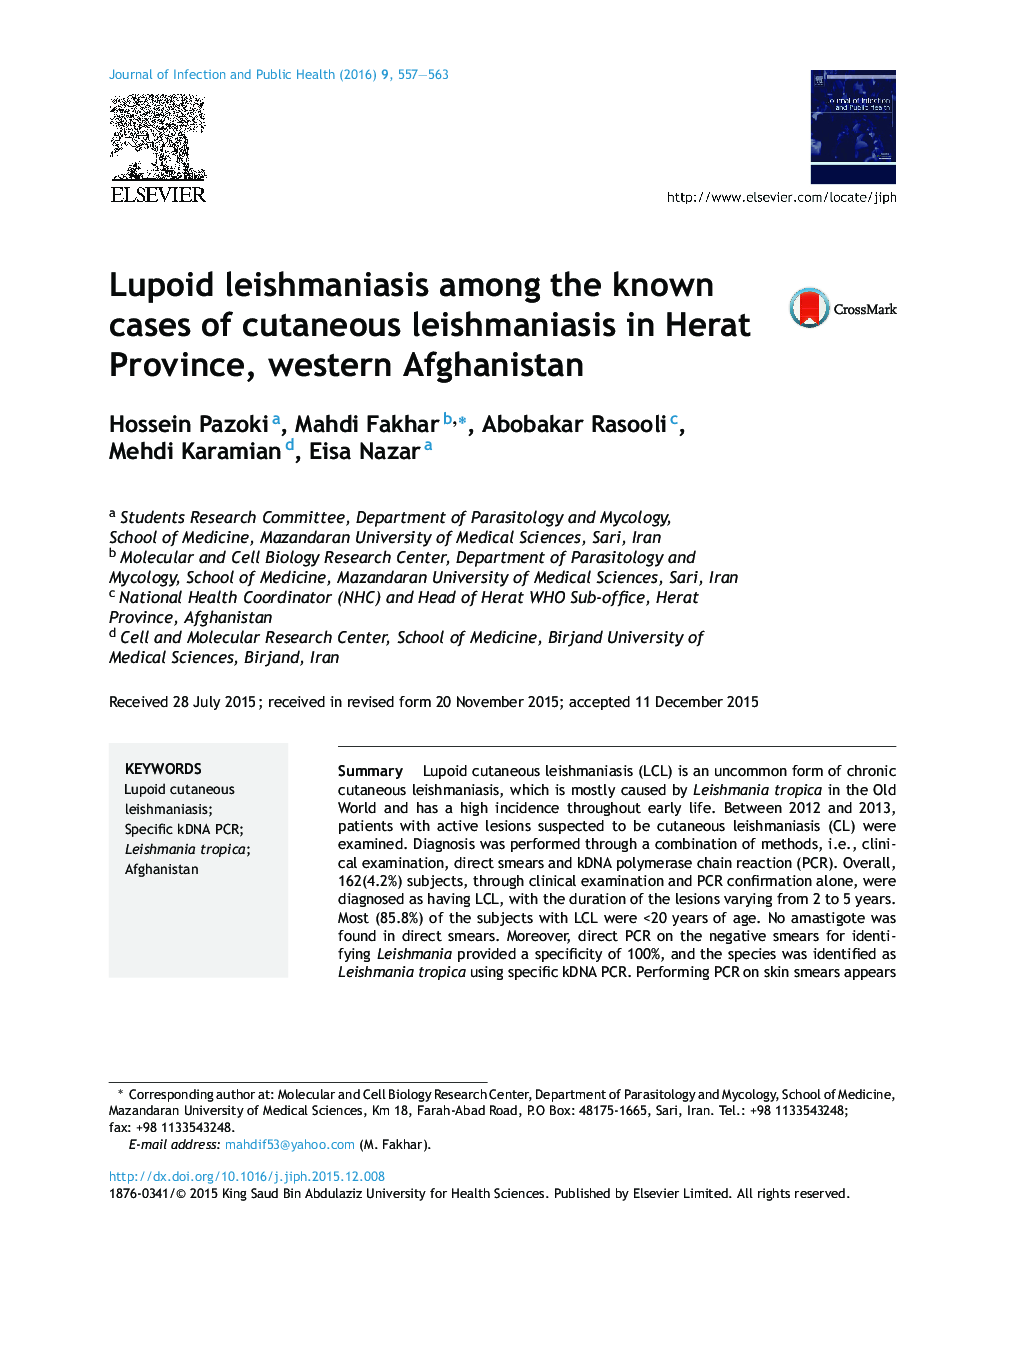 Lupoid leishmaniasis among the known cases of cutaneous leishmaniasis in Herat Province, western Afghanistan